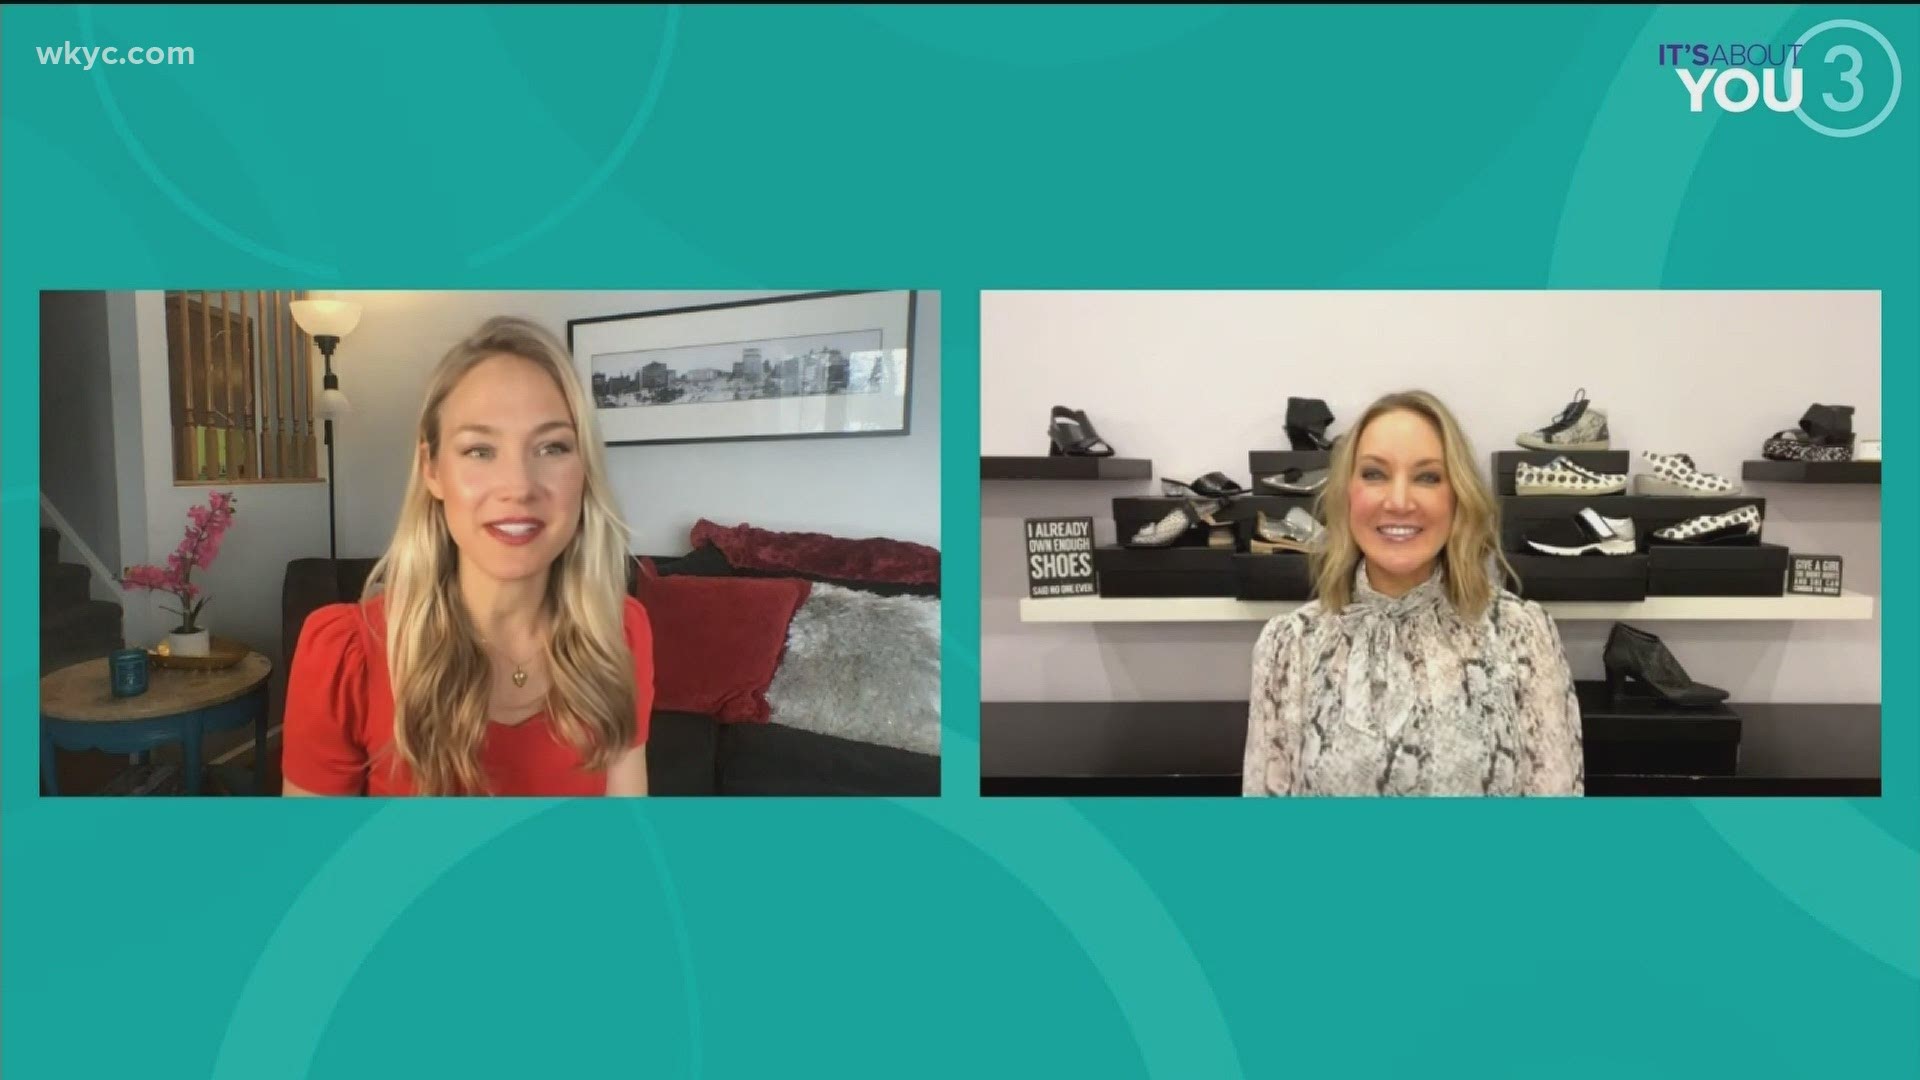 Alexa talks with Amy Bradford today to learn about the best spring style trends and Amy's Shoes and Apperal!